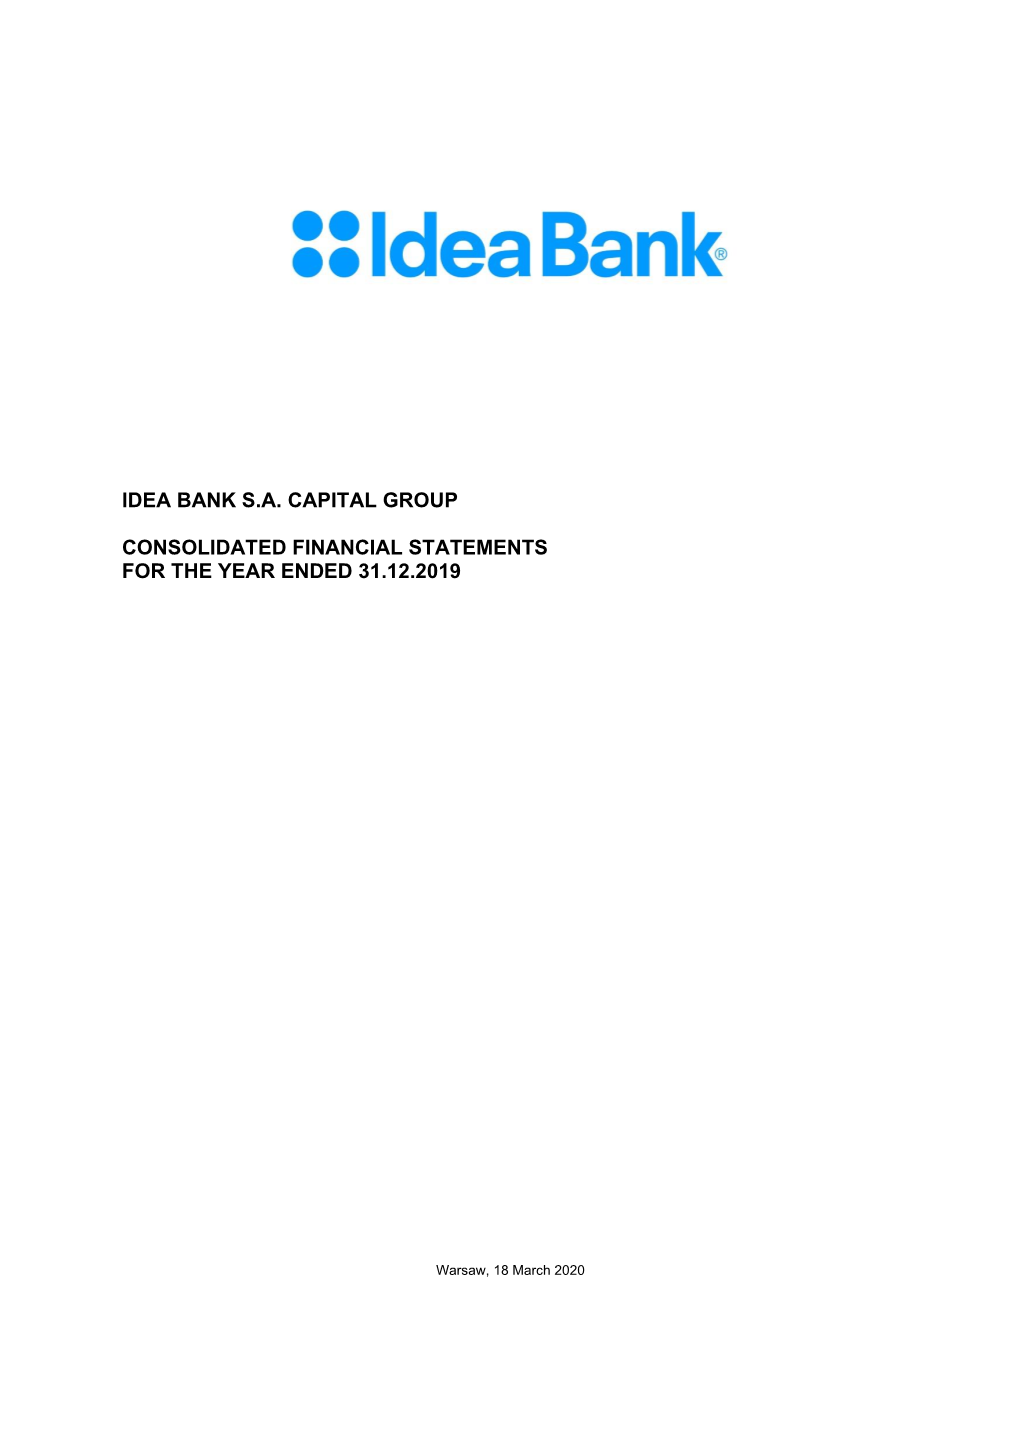 Idea Bank S.A. Capital Group Consolidated Financial Statements for the Year Ended 31.12.2019